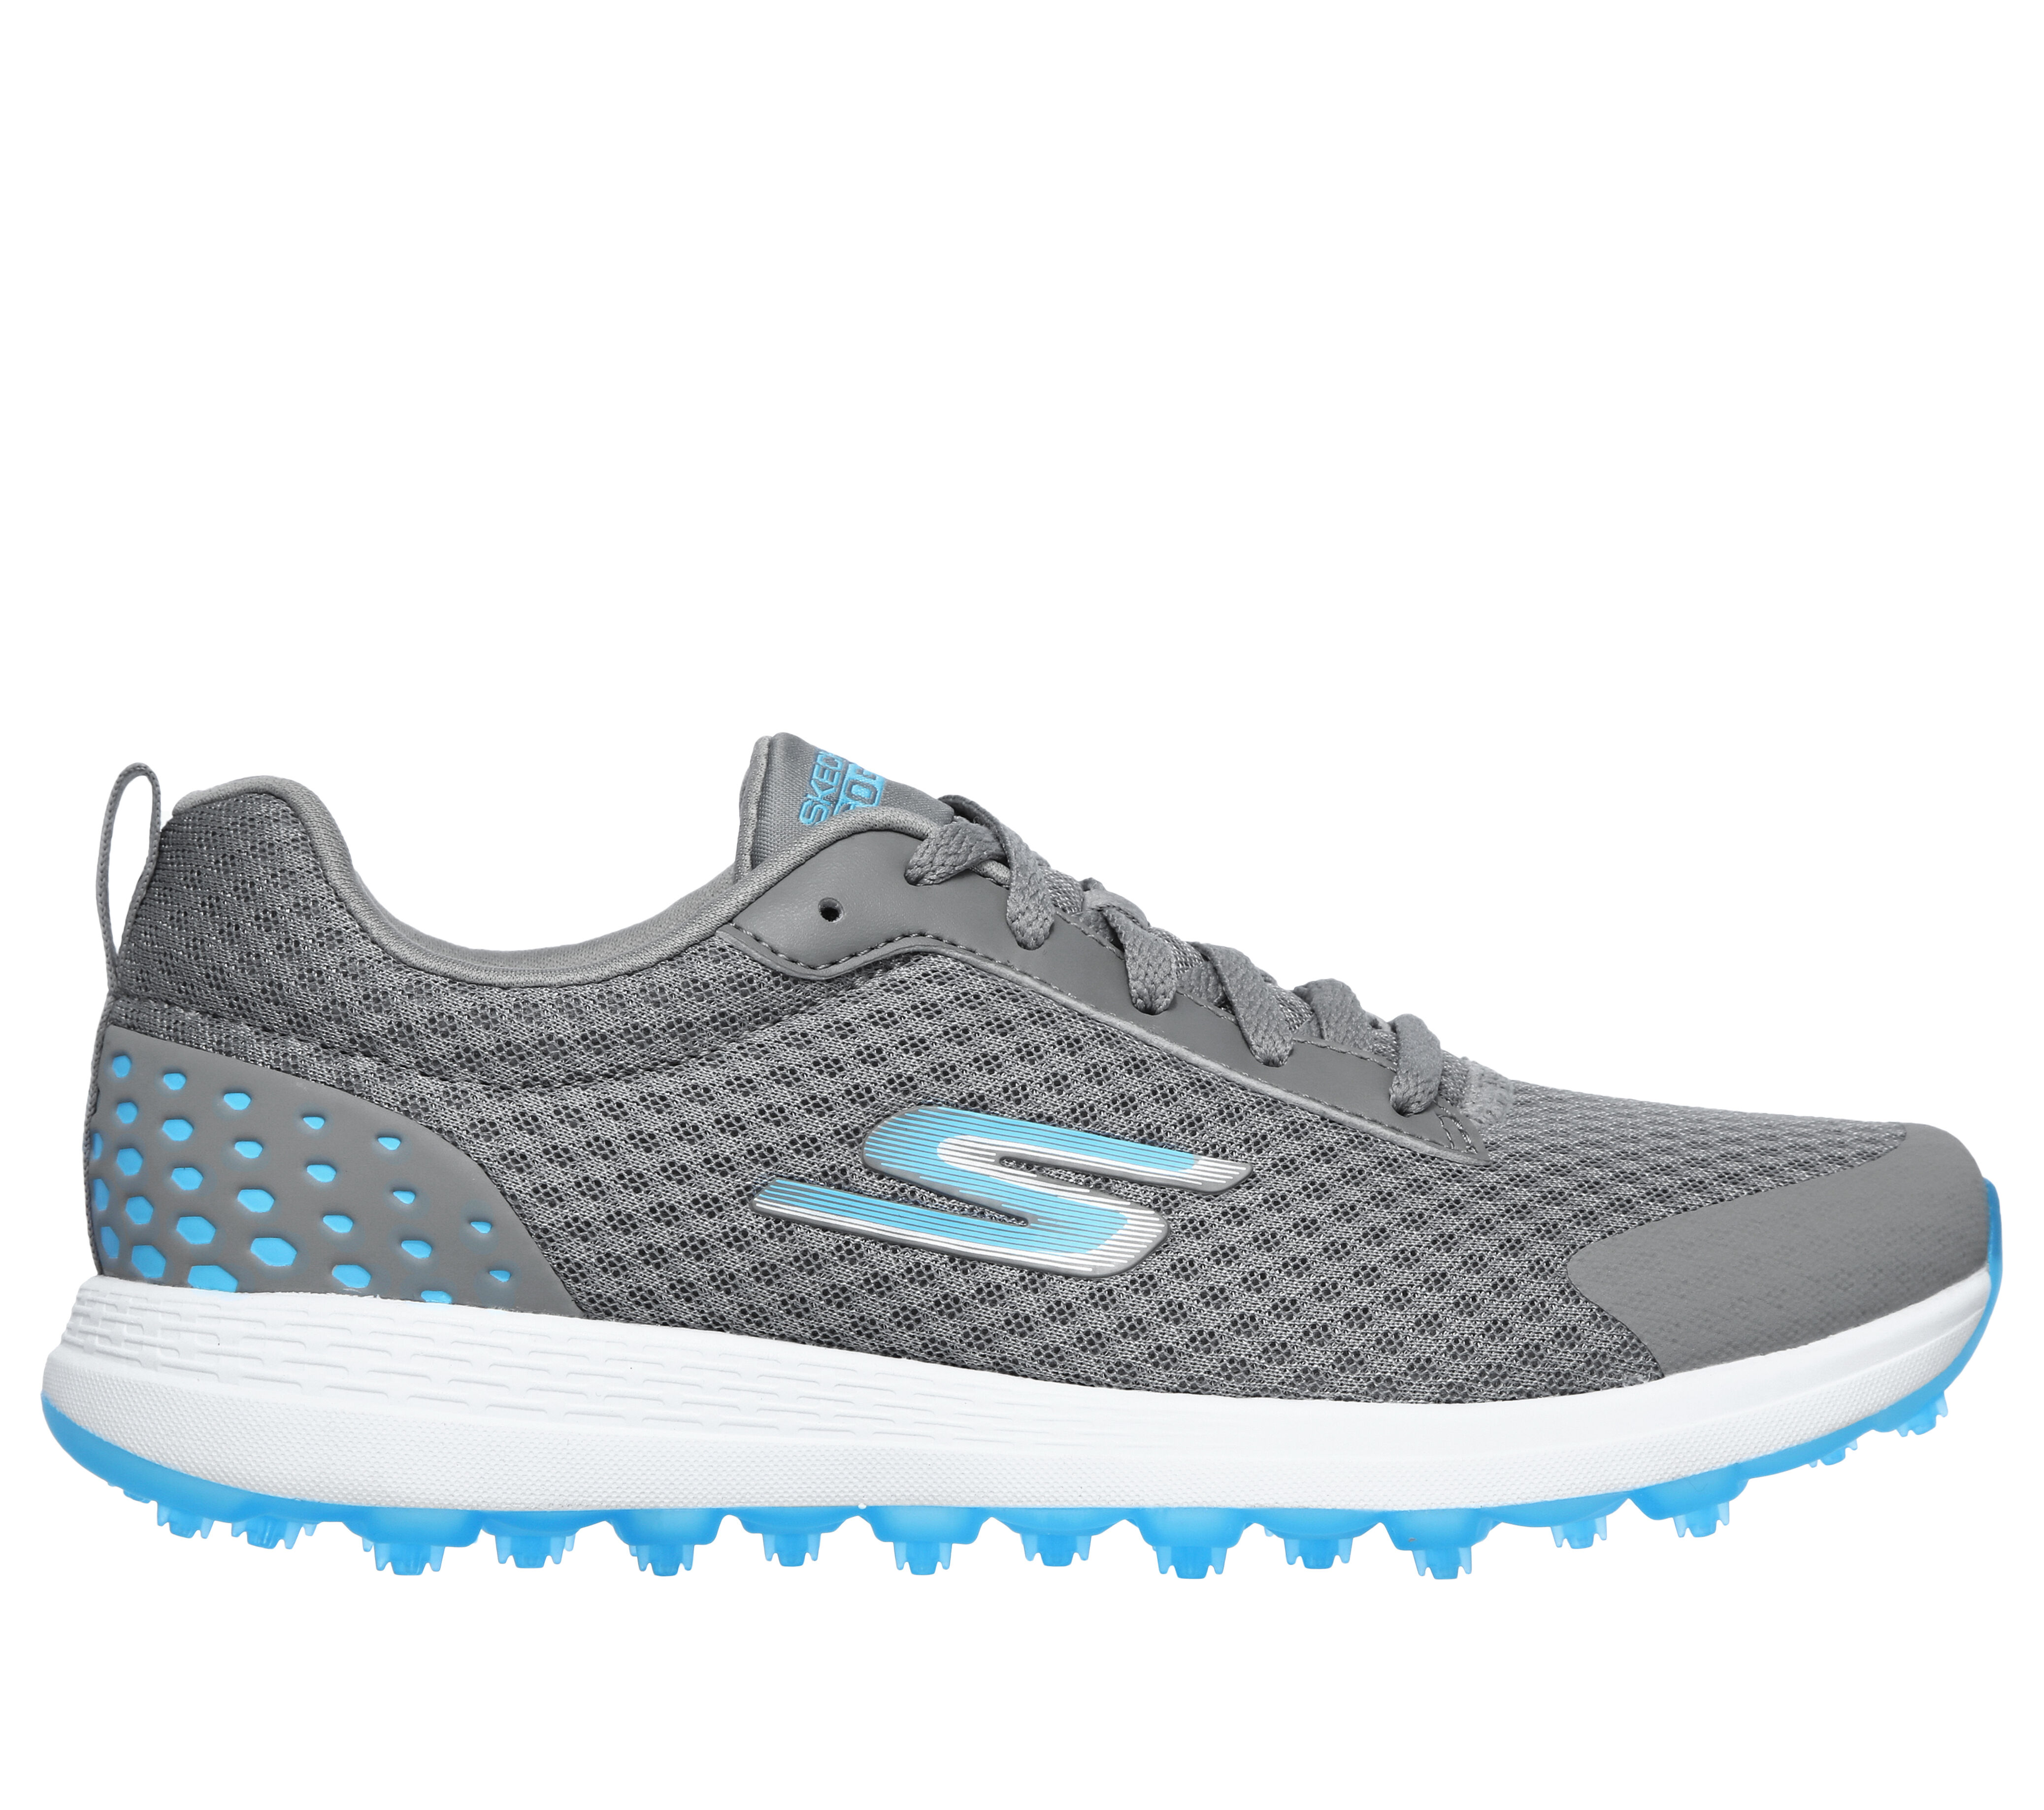 skechers golf shoes extra wide